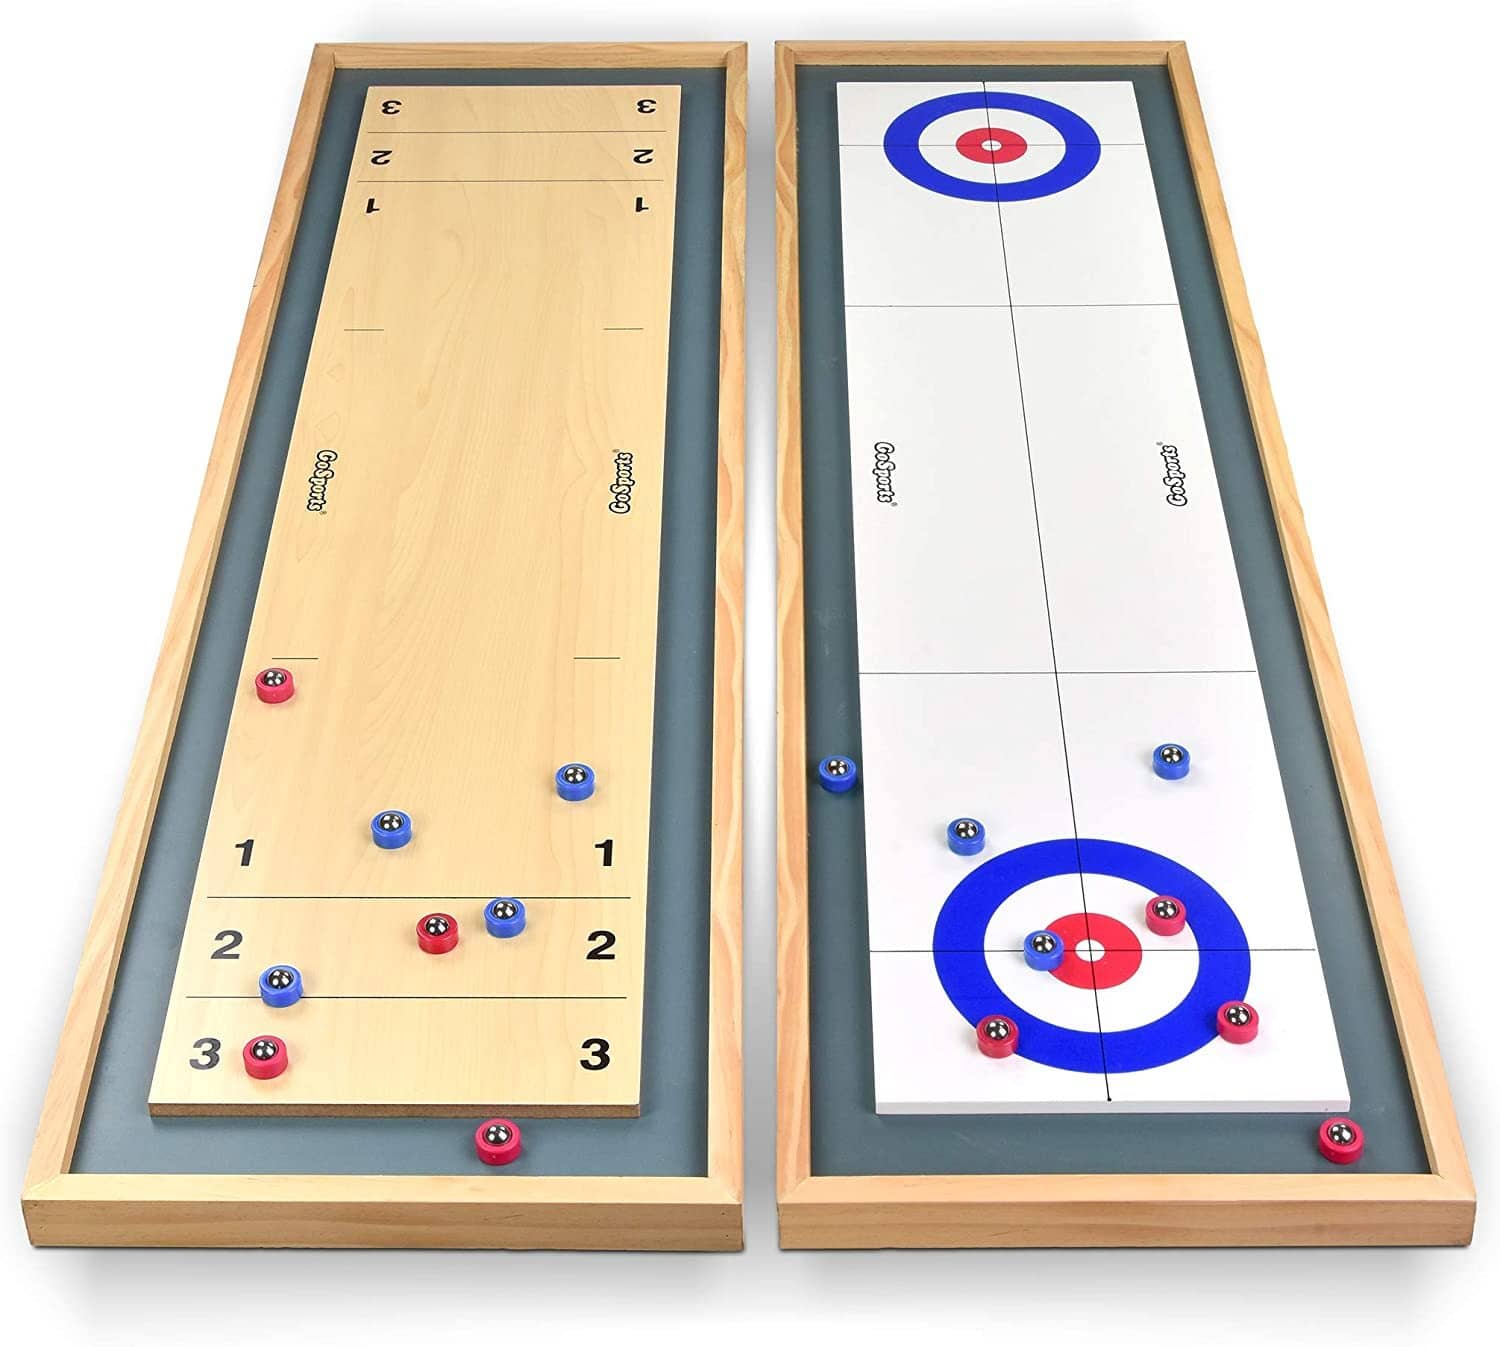 Franklin Sports 2-in-1 Shuffleboard Table and Curling Set - Portable  Tabletop Set Includes 8 Rolling